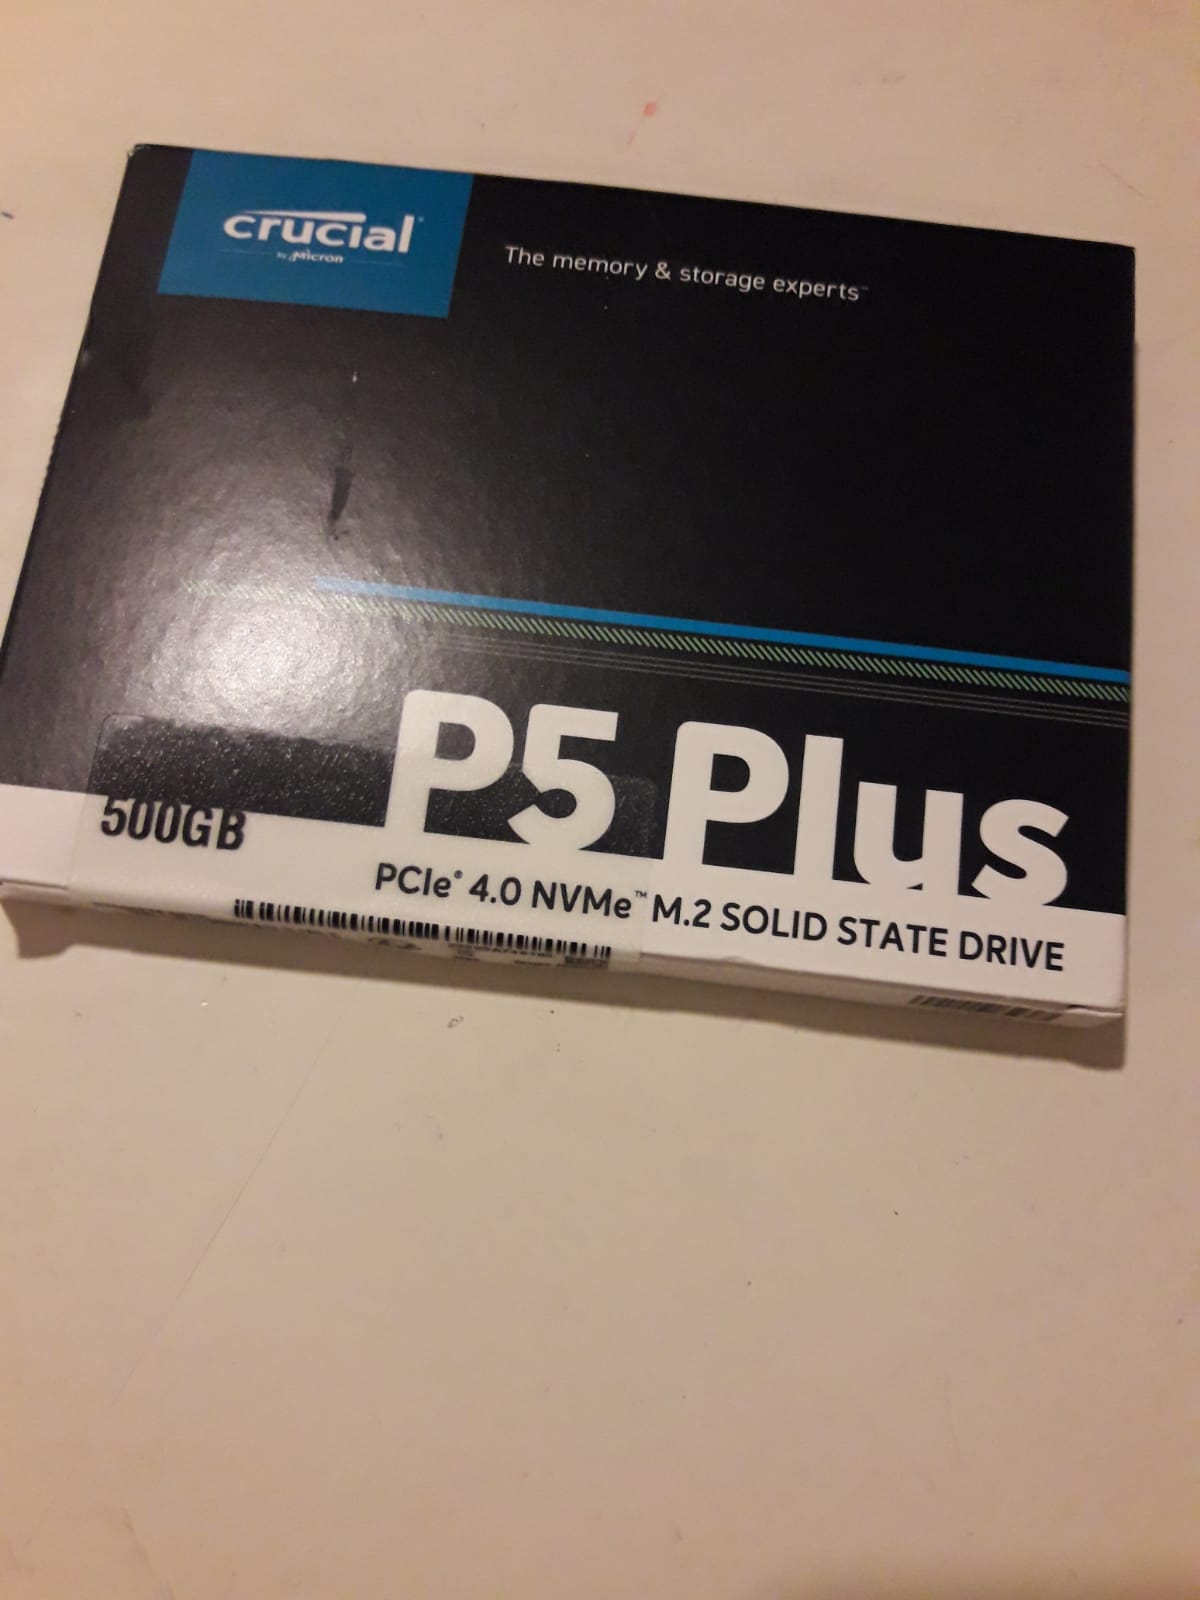 Crucial P5 Plus 500GB PCIe 4.0 3D NAND NVMe M.2 Gaming SSD, up to 6600MB/s